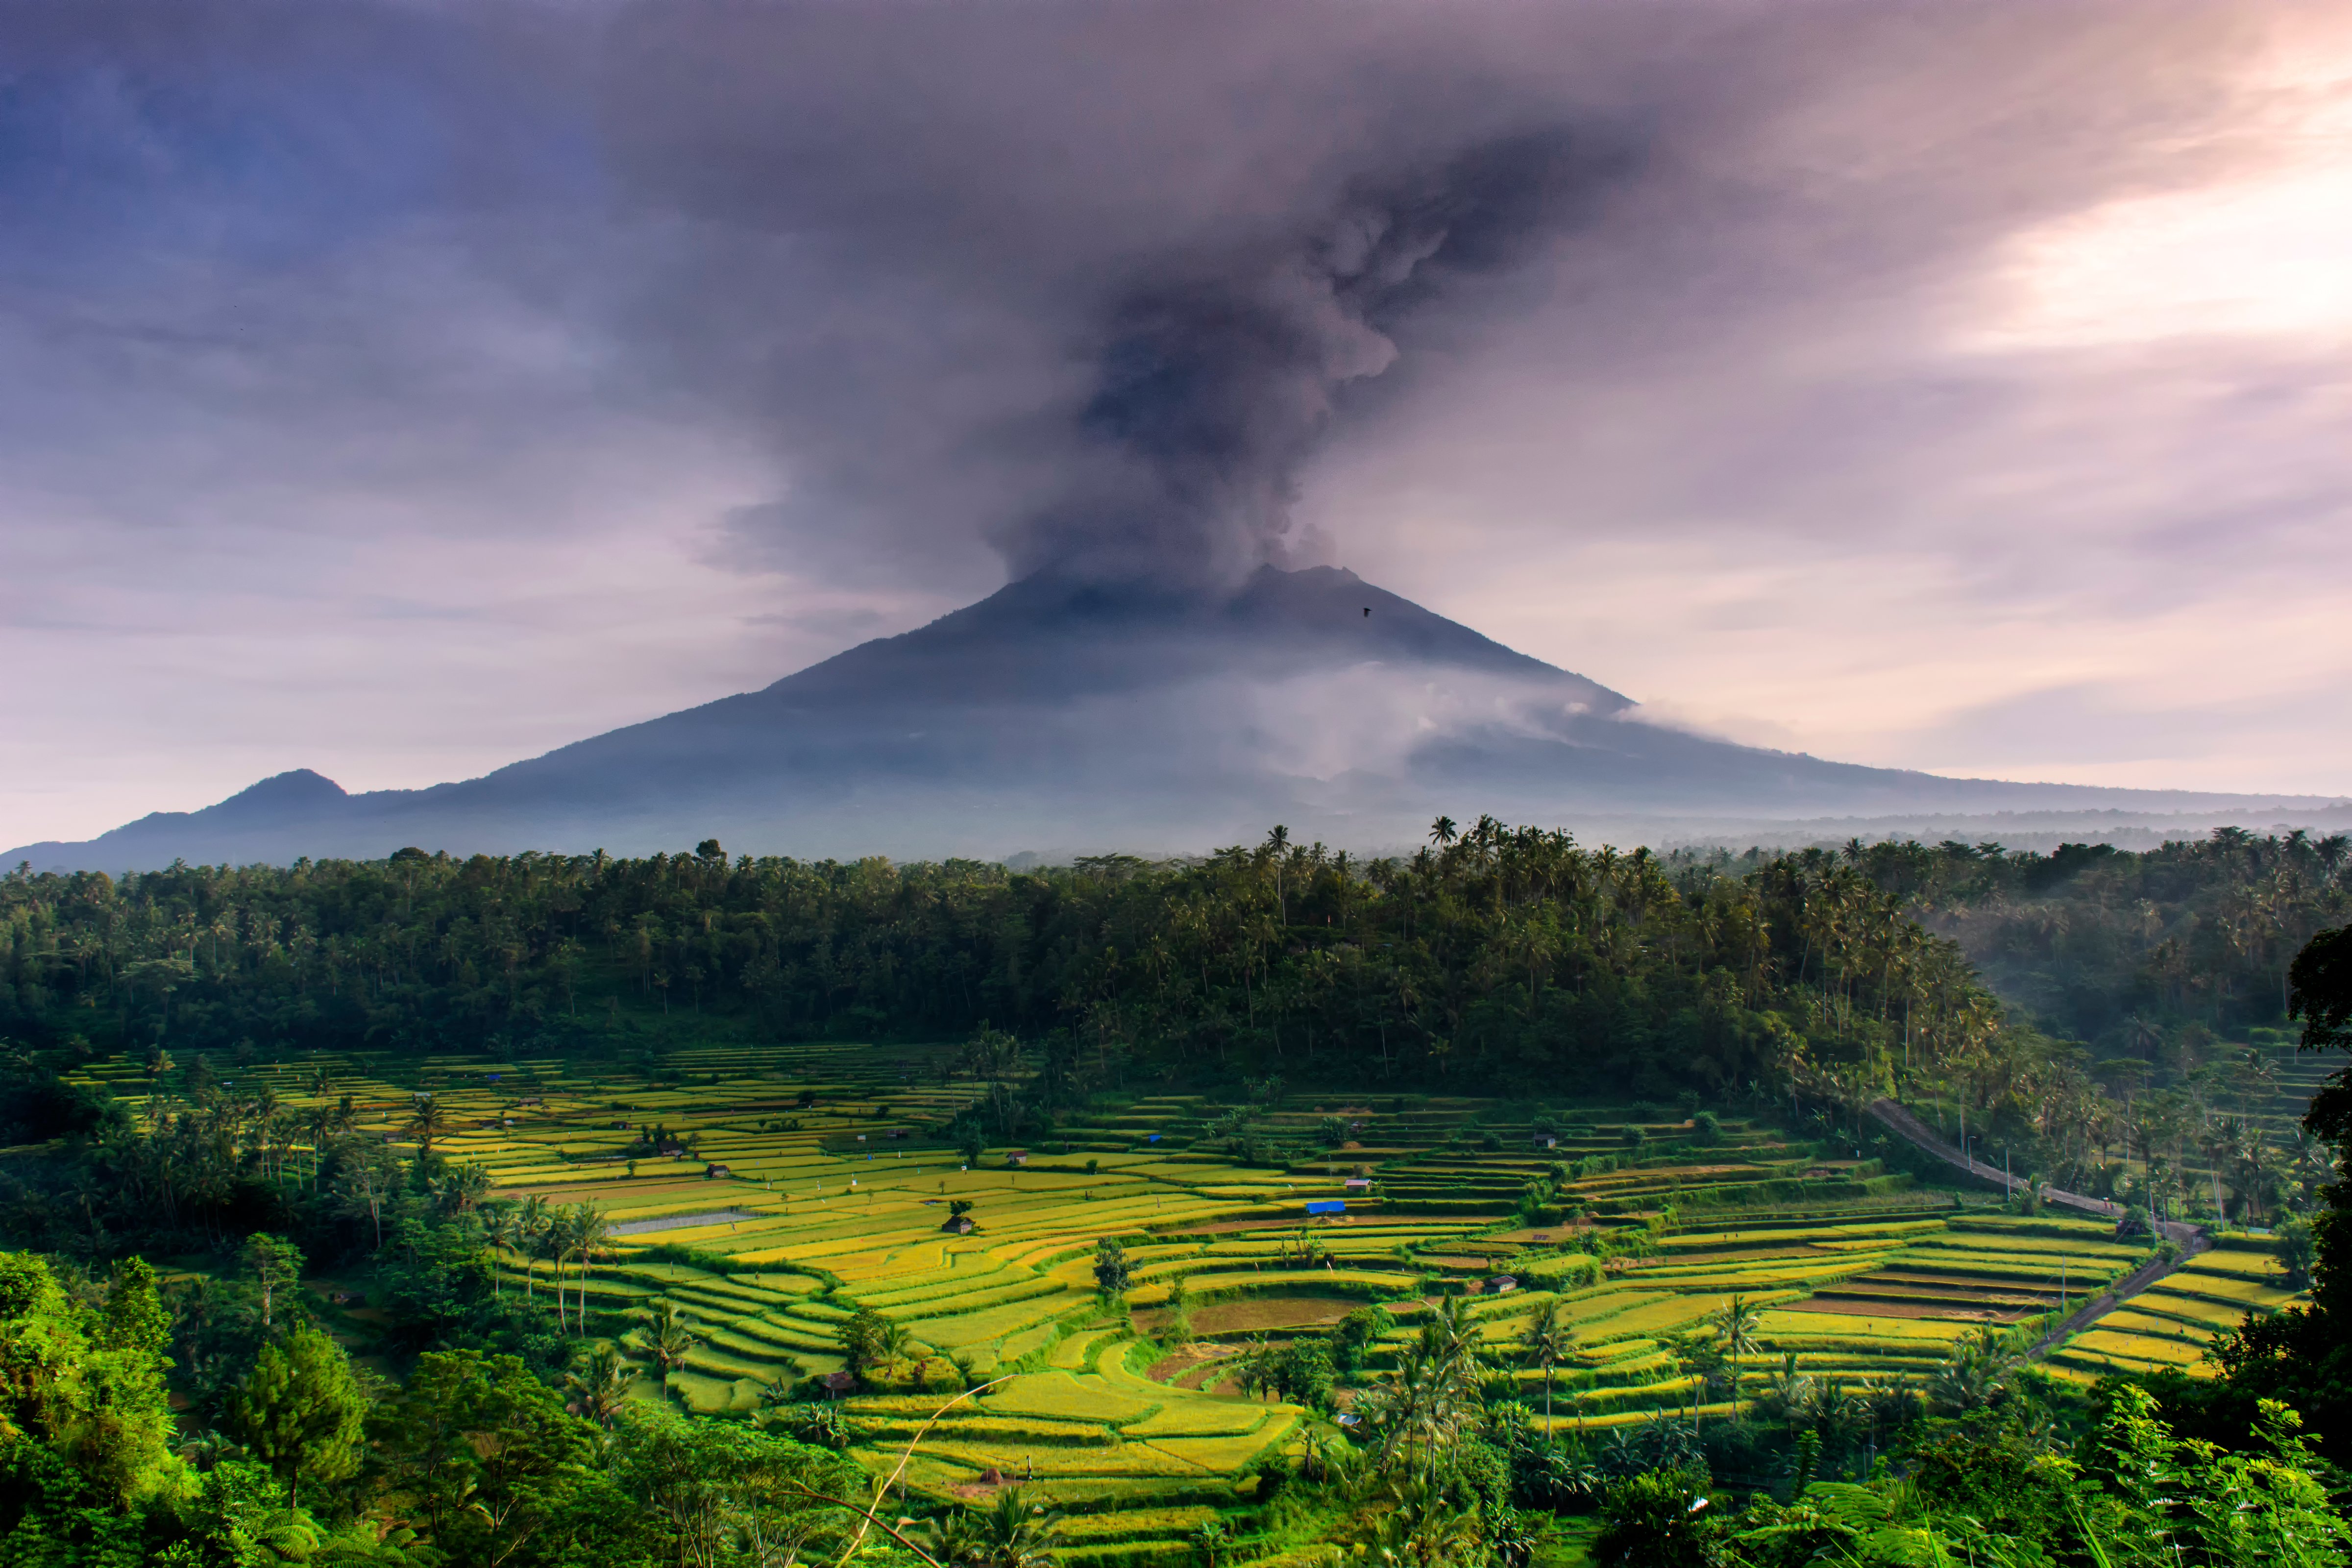 morning scenery with the eruption of mount Agung, Bali taken at 11/27/2017 from beaskih area (Raung Binaia—Getty Images)